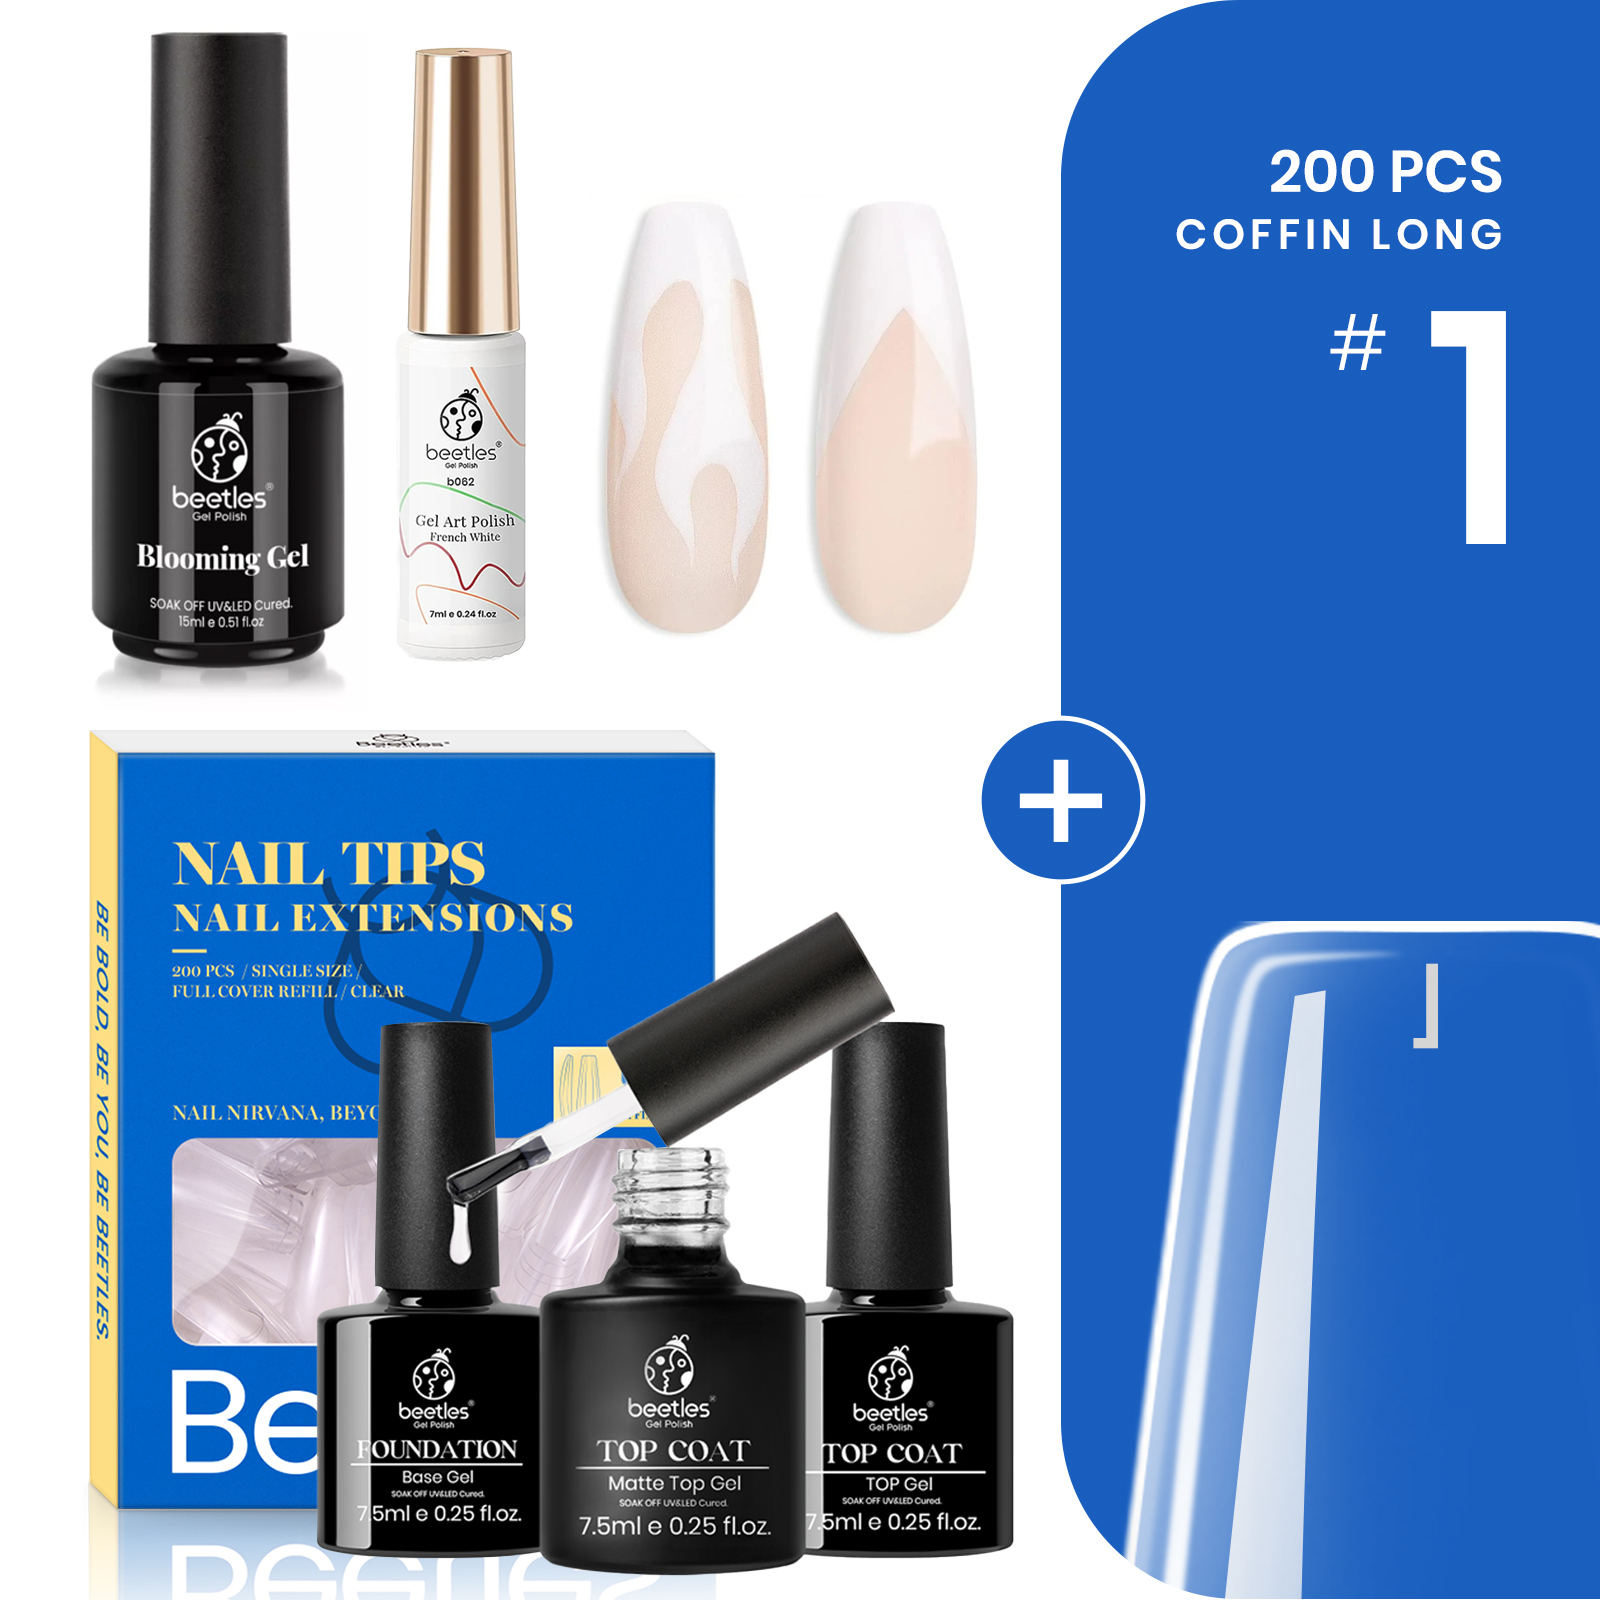 Beetles Gel Nail Tips Kit Beetles gel x Salon Quality & Affordable Softer & Resilient Premium PMMA MaterialsThinner Cuticle Contact Area Thicker Toward The Tip